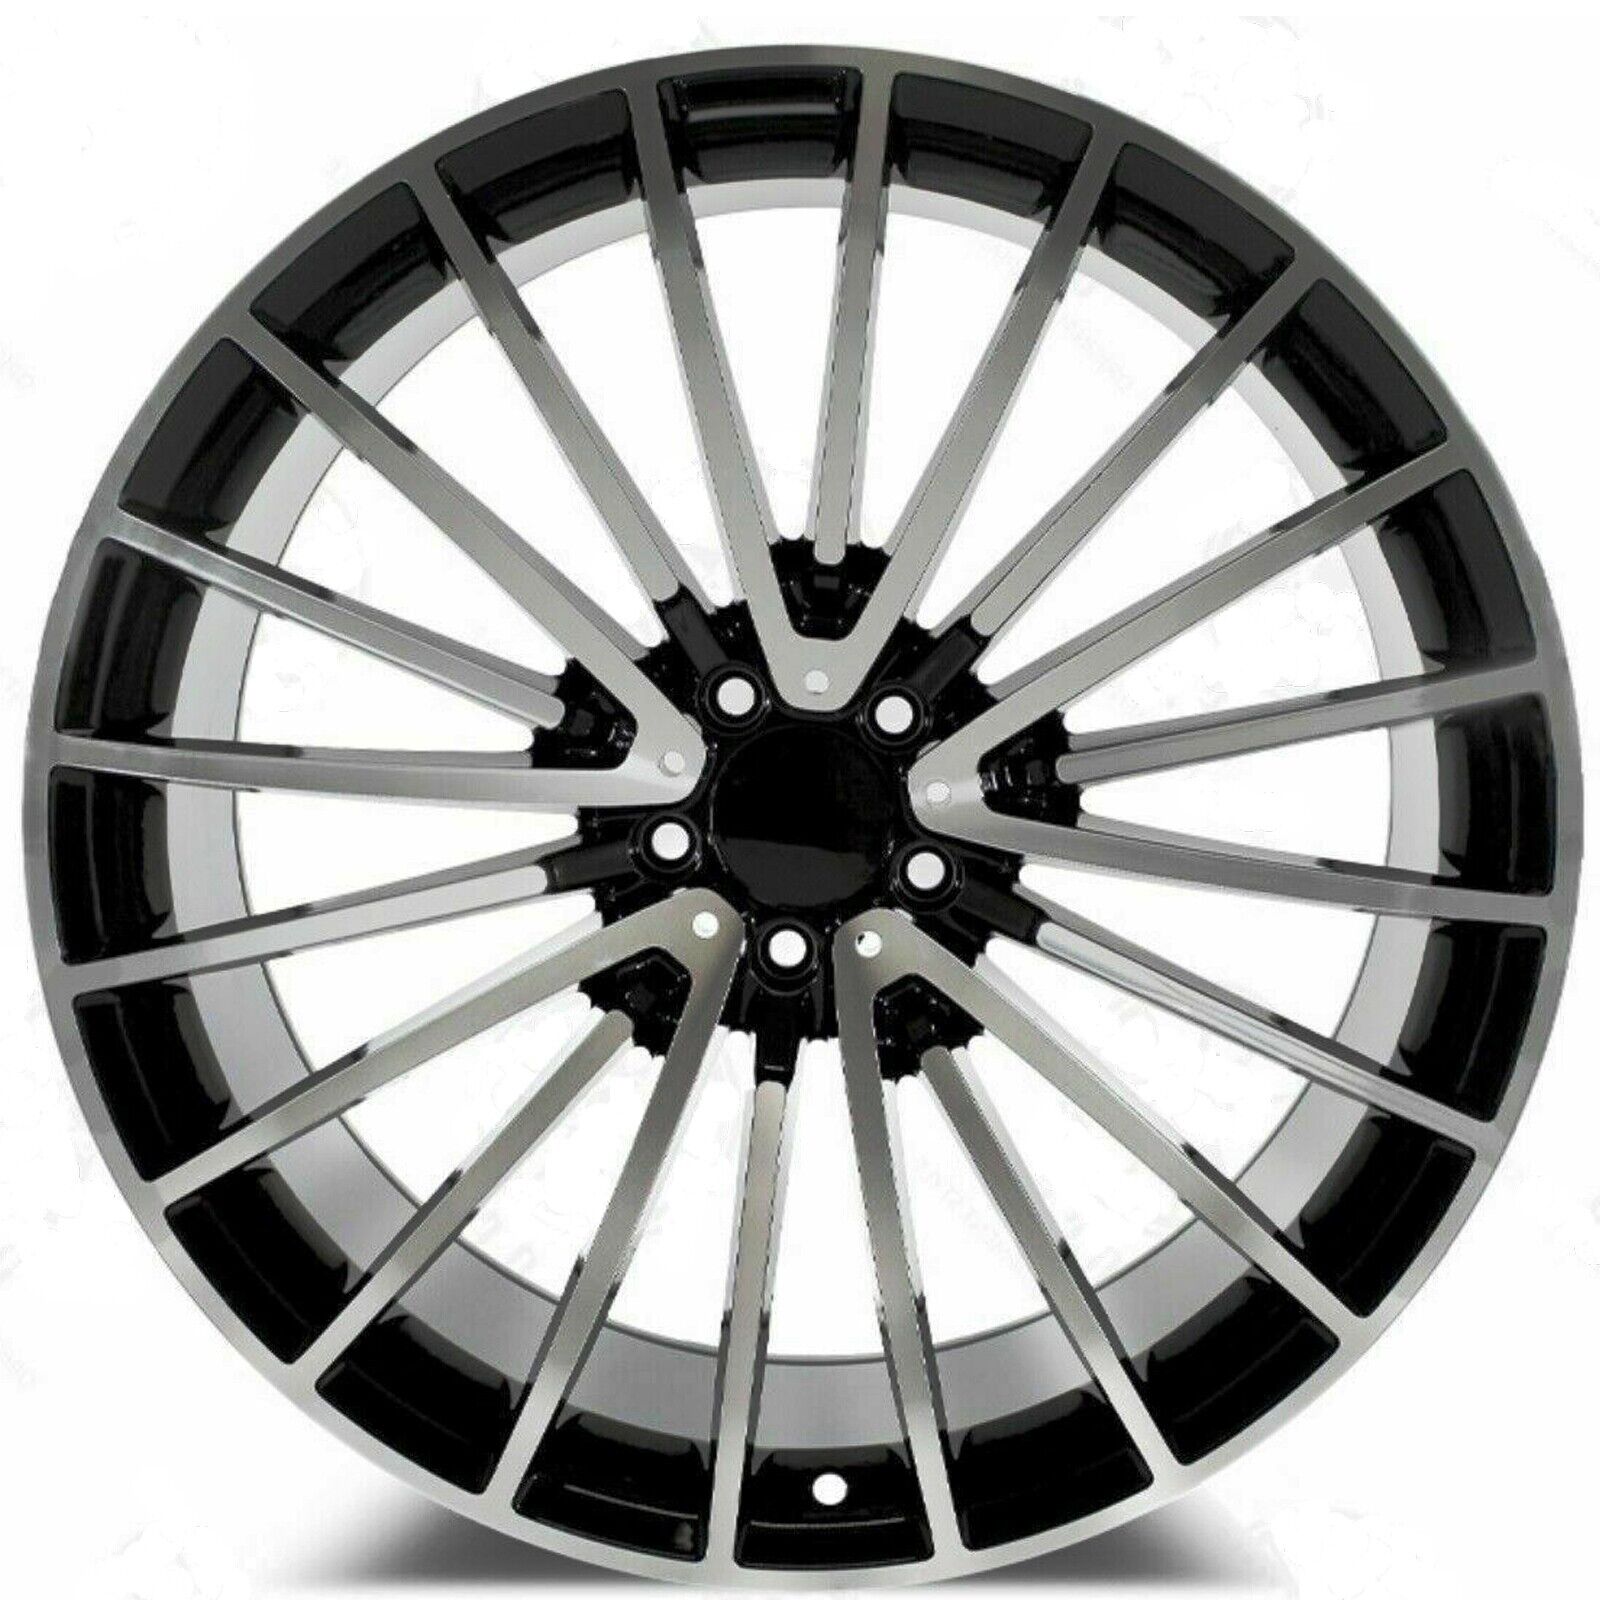 4 New Rims 20x8.5 35 5x112 Black Machined for Mercedes Benz CLS450 E350 S63 500